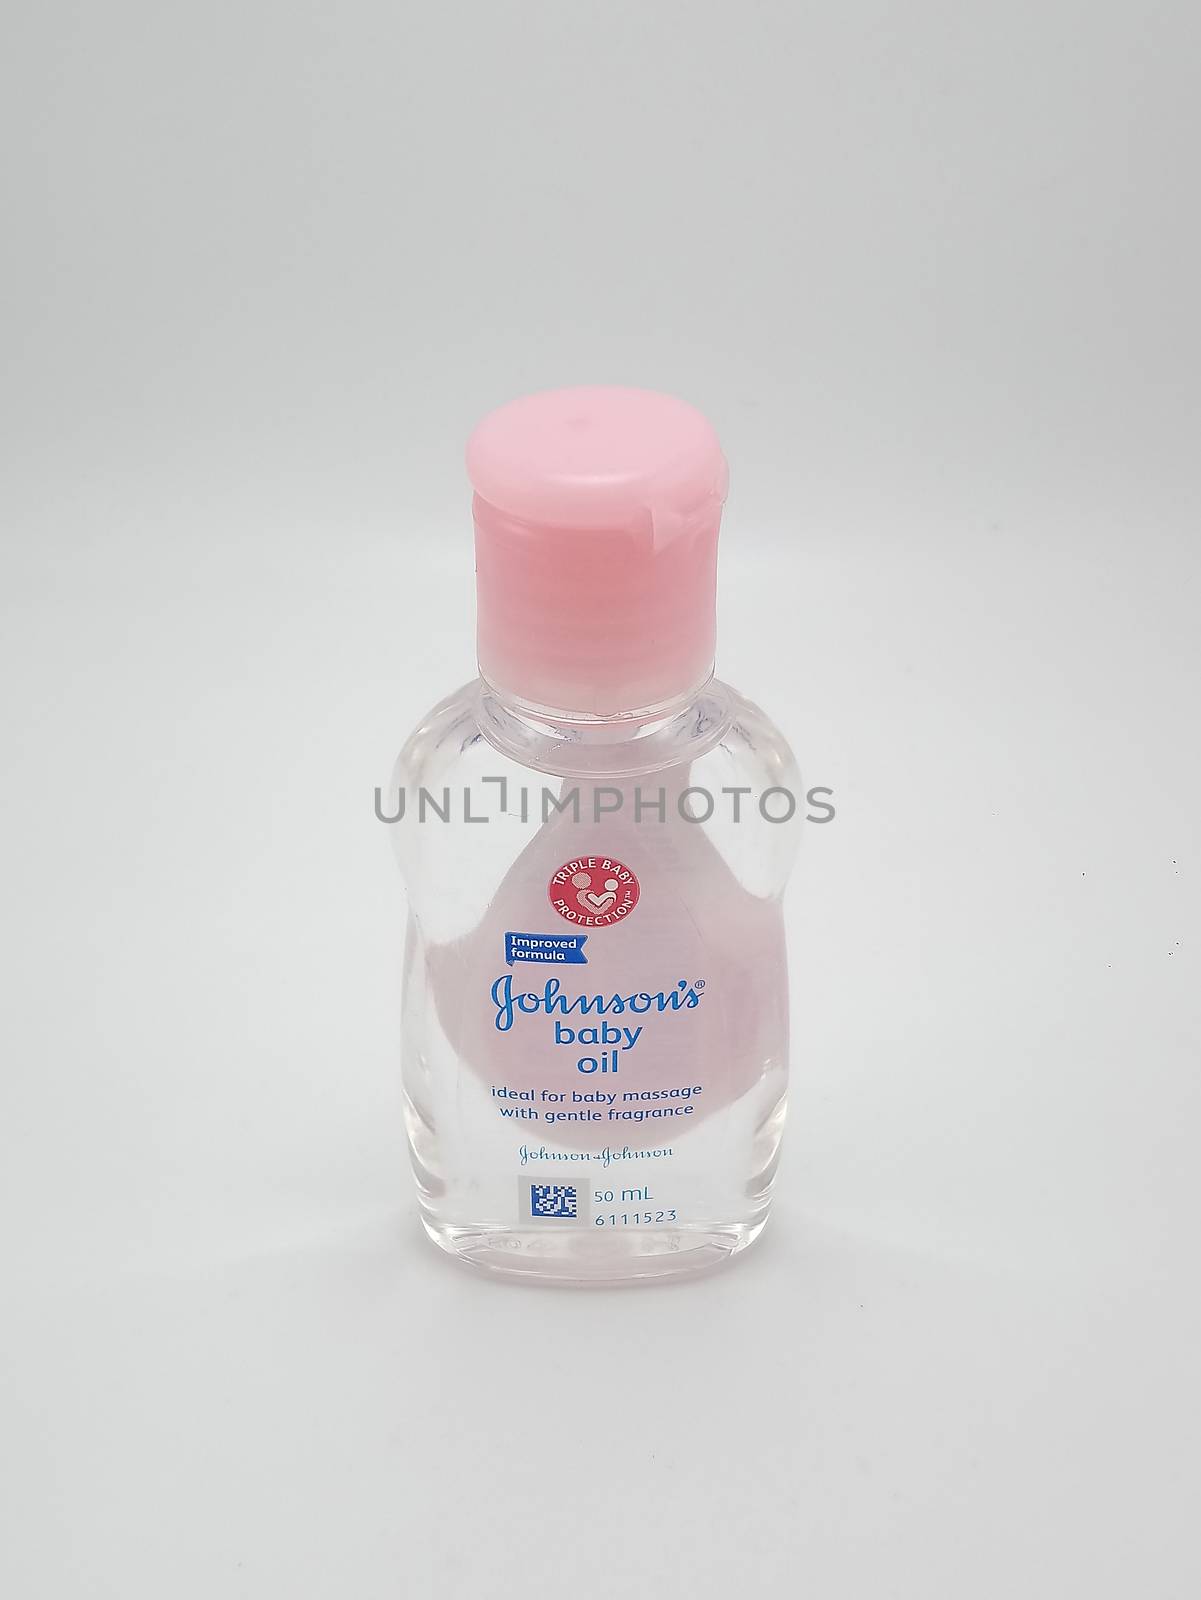 Johnsons baby oil in Manila, Philippines by imwaltersy